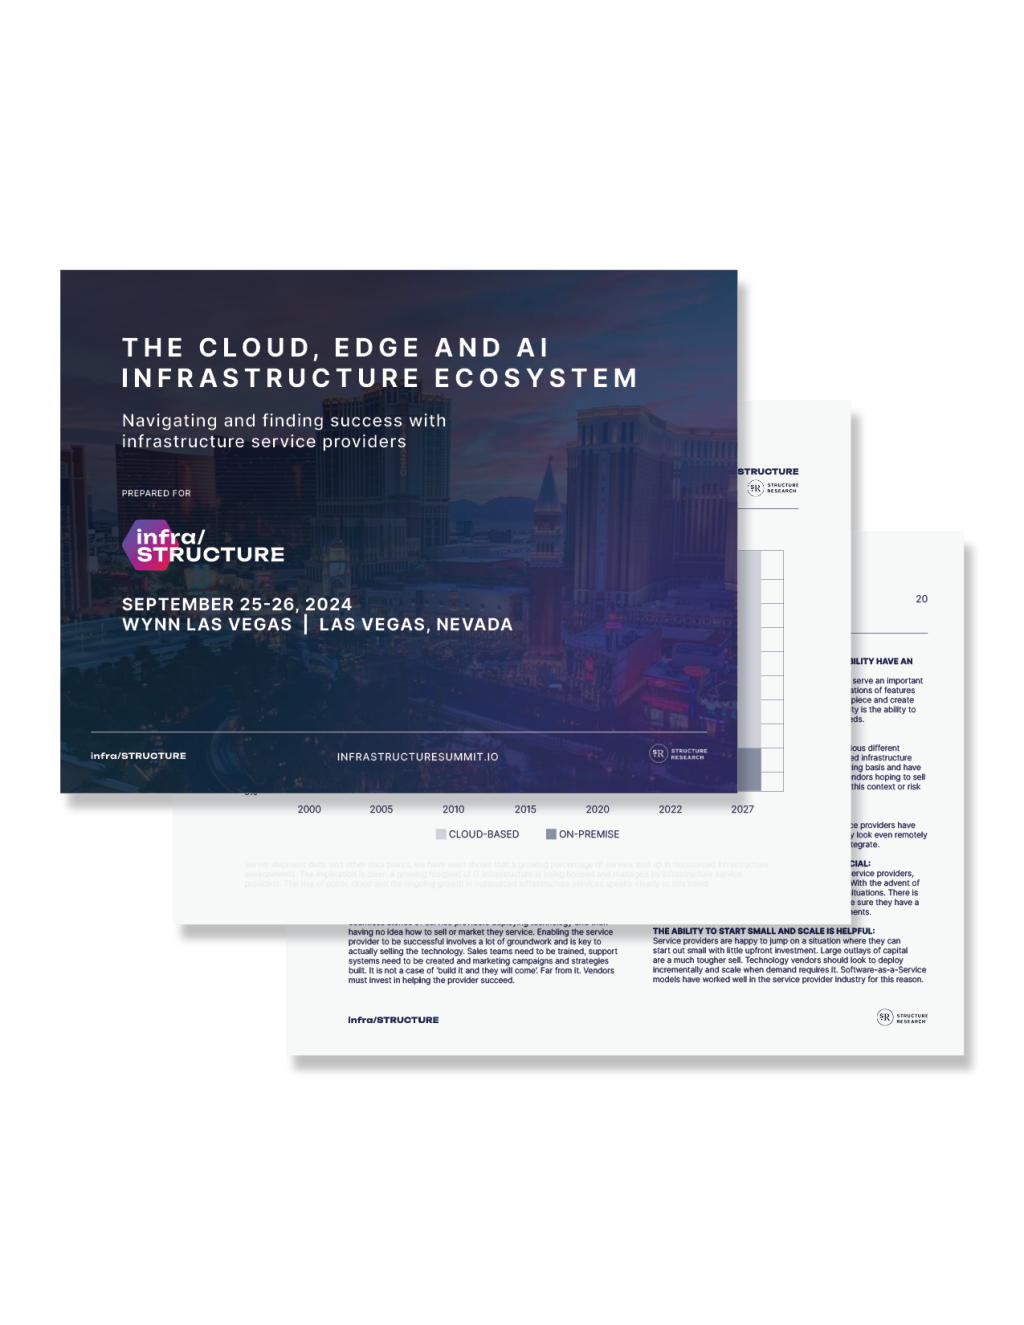 Mastering the Future: Navigating Success in The Cloud, Edge, and AI Infrastructure Ecosystem